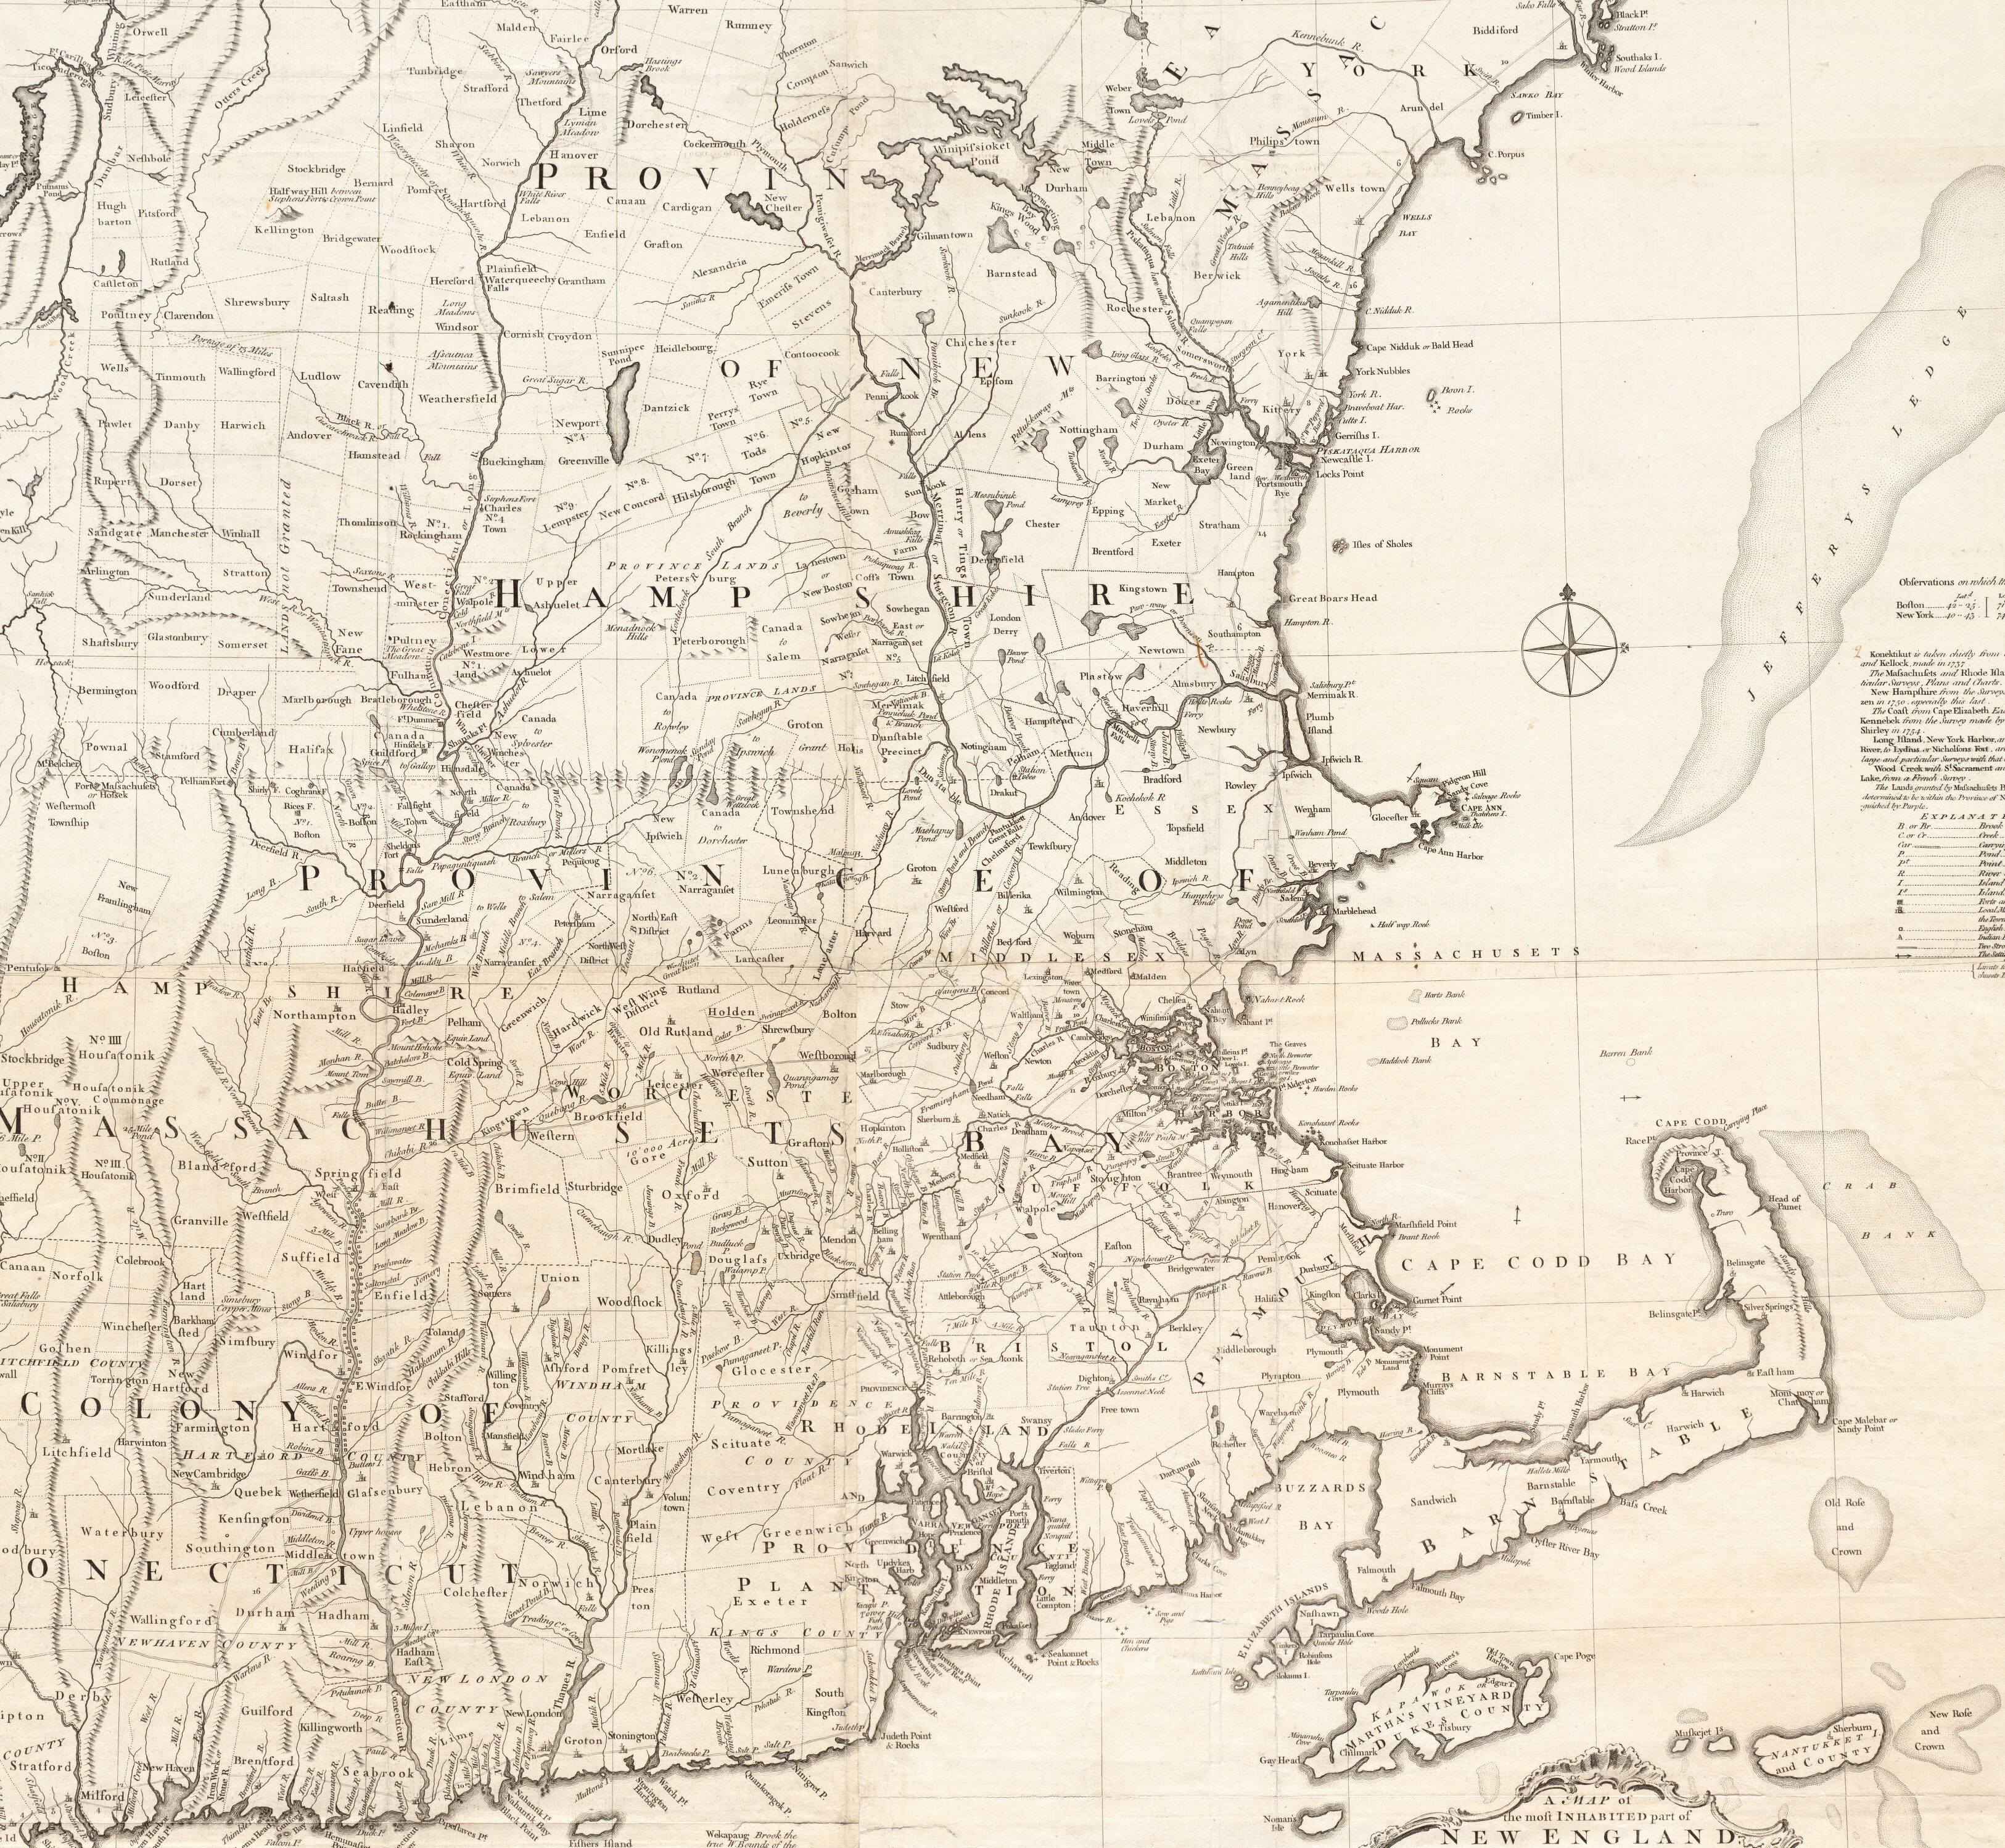 A black and white map of New England, on which such labels can be seen as the Colony of Connecticut, the Province of Massachusetts Bay, and the Province of New Hampshire